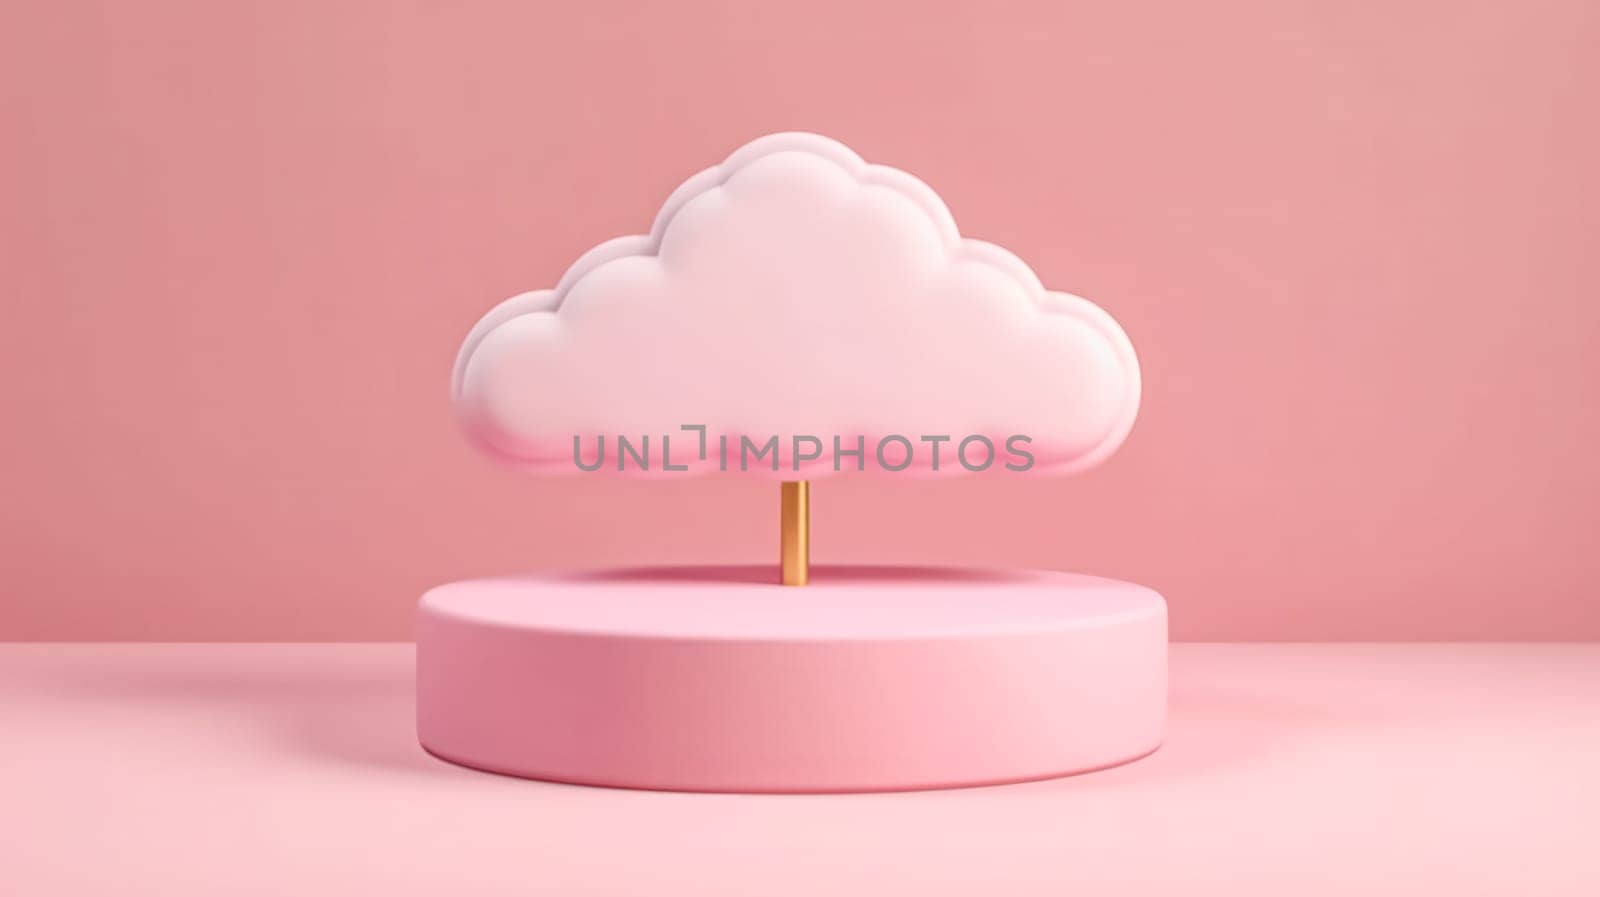 A 3D rendering of a podium positioned amidst flat clouds with reddish tones, providing an atmospheric setting for product display and presentation.